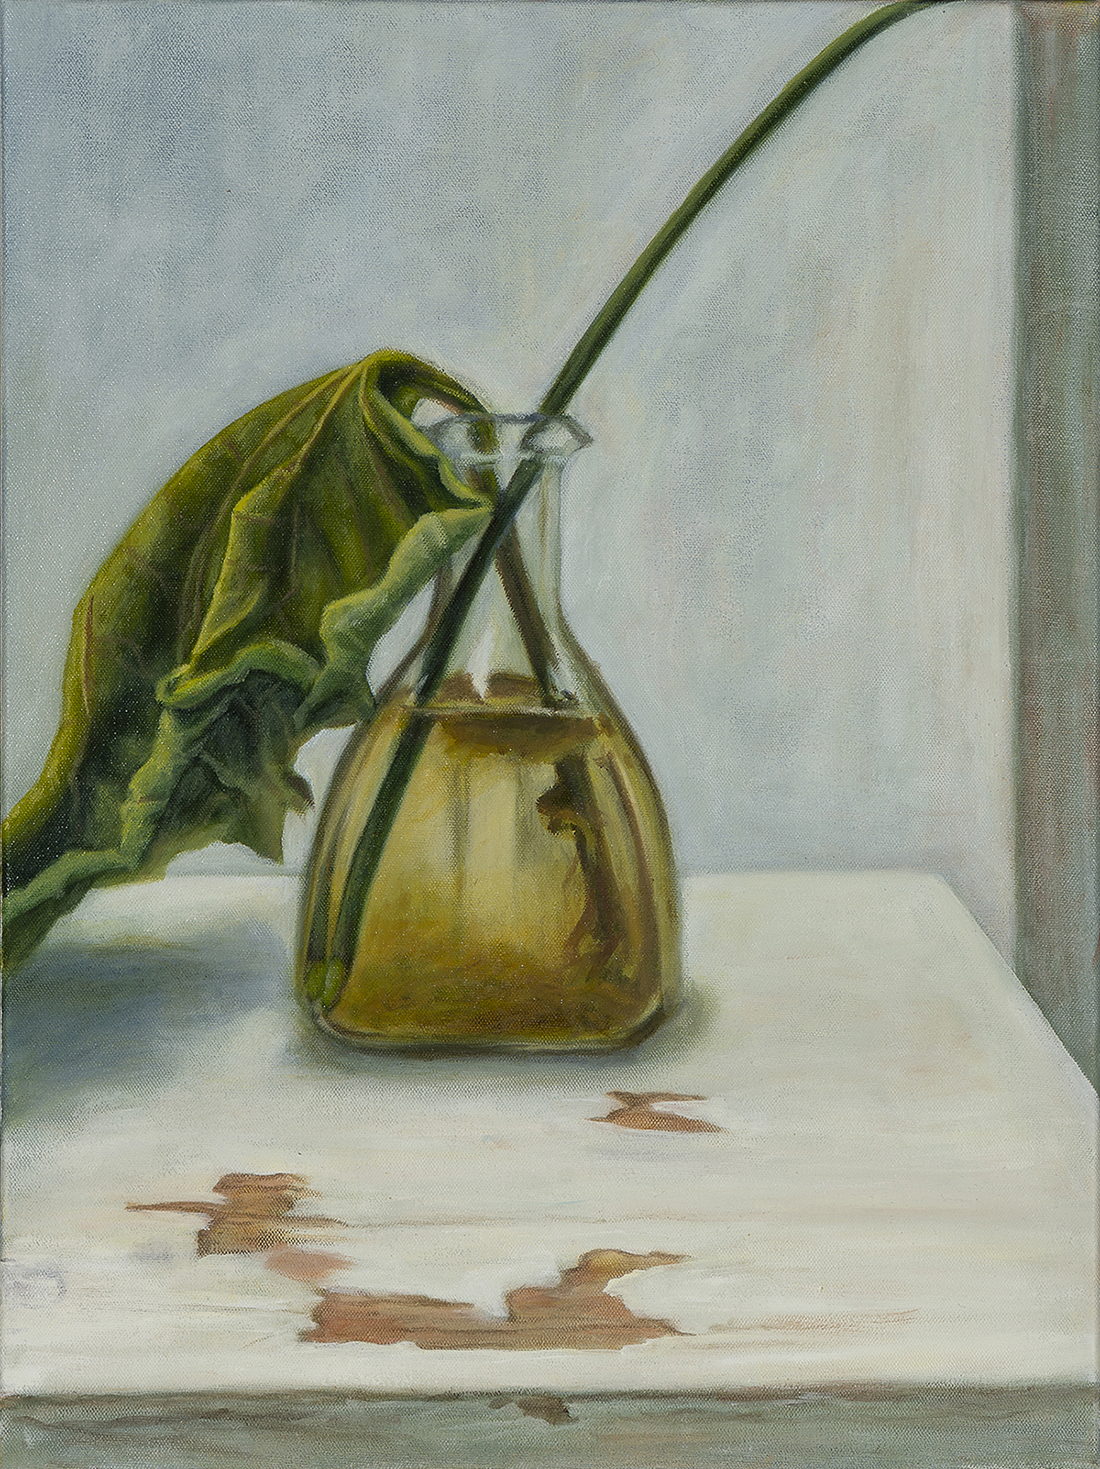 A painting of a dying flower in a vase.